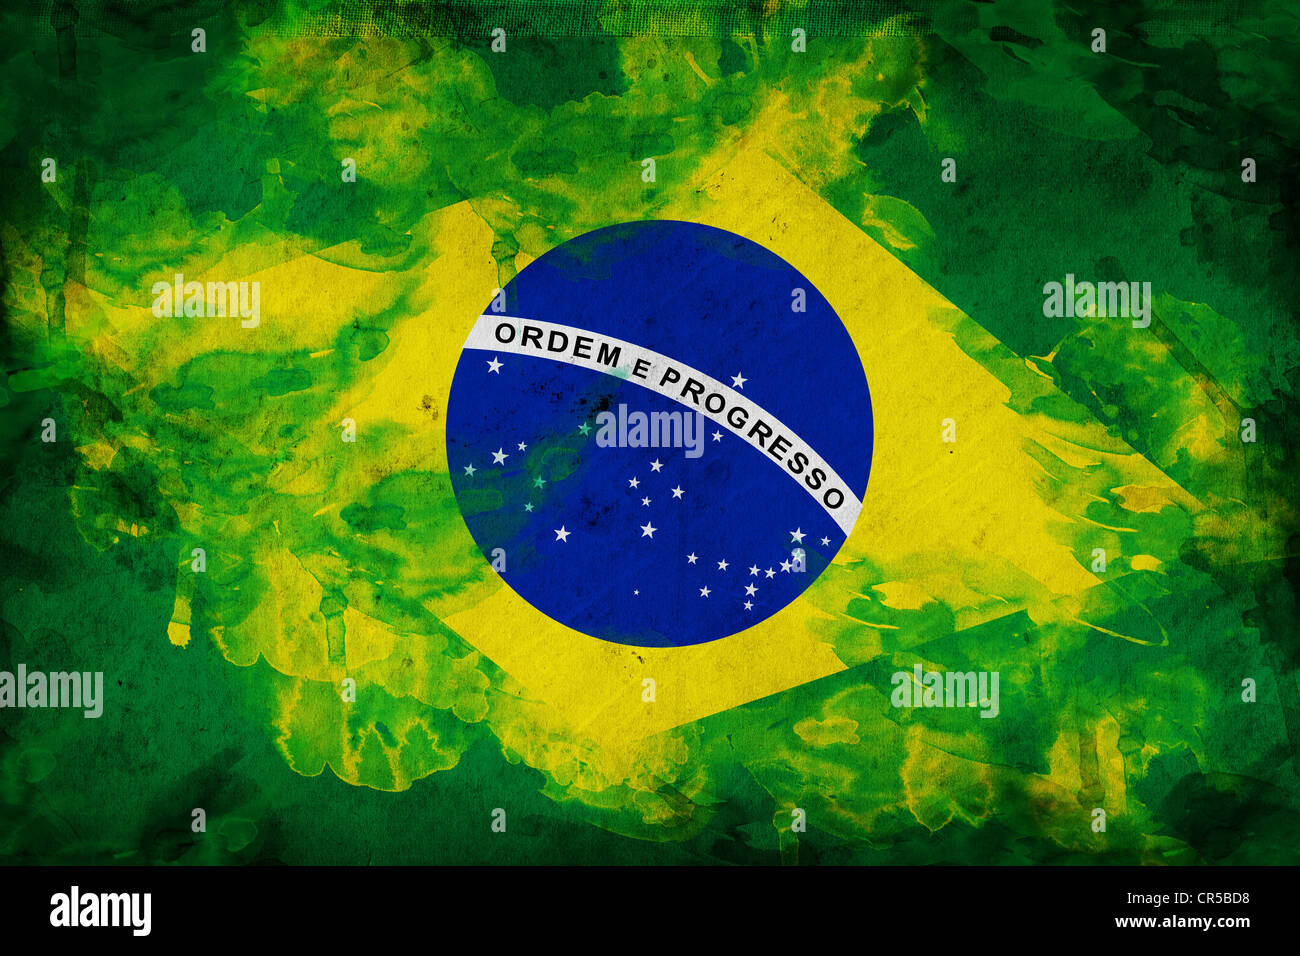 Grunge flag of Brasil, illustration is overlaying a grungy texture Stock Photo